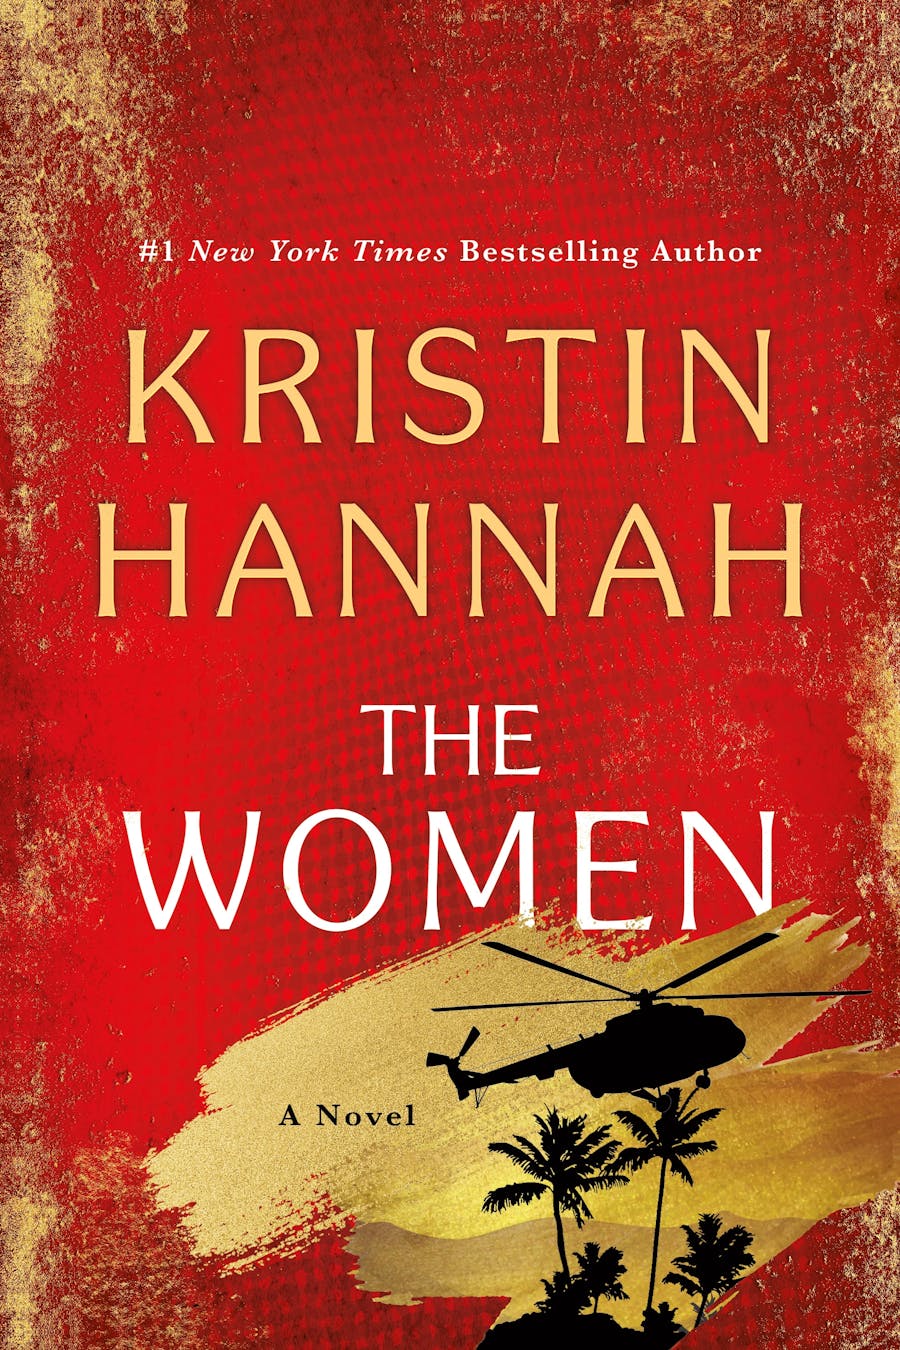 <p>At face value, <em>The Women</em> is the untold story of the women who fought in the Vietnam War, but there is so much more to unpack throughout the 20-year journey we take with Frankie.</p> <p>Kristin Hannah was able to create such a visceral experience for the reader to really feel the pain of war, the impact it made not only on the service members, but the ripple effect it had on their families, society, and the political climate during this era. You will be rooting for Frankie to find peace from the first moment we meet her up until the very last page.</p> <p><em>—MB</em></p> <p><em>Out now</em></p><p>Sign up for today’s biggest stories, from pop culture to politics.</p><a href="https://www.glamour.com/newsletter/news?sourceCode=msnsend">Sign Up</a>